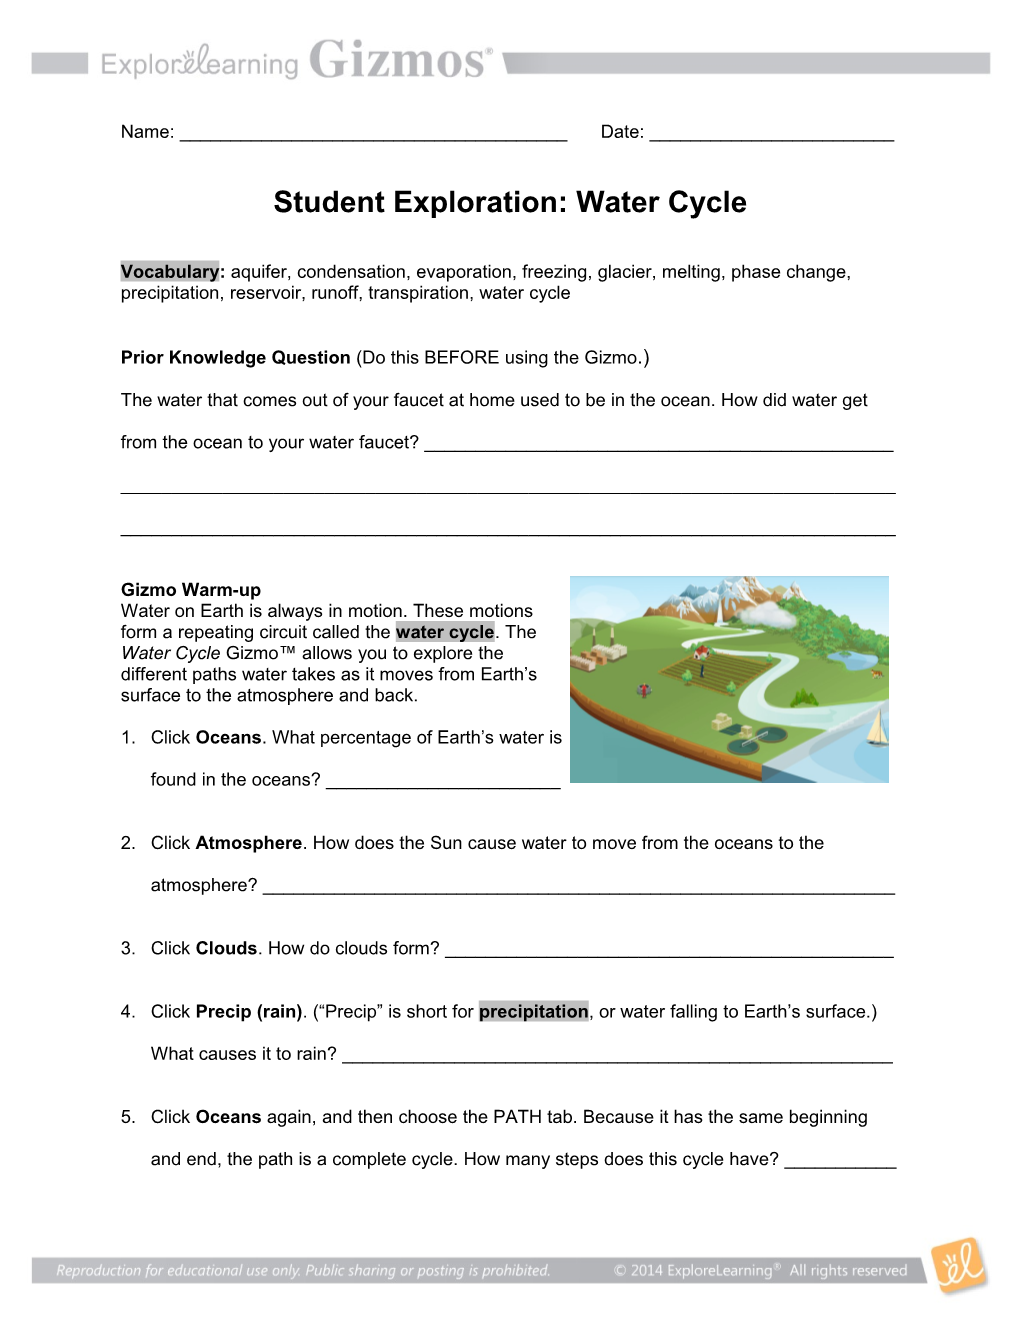 Student Exploration: Water Cycle